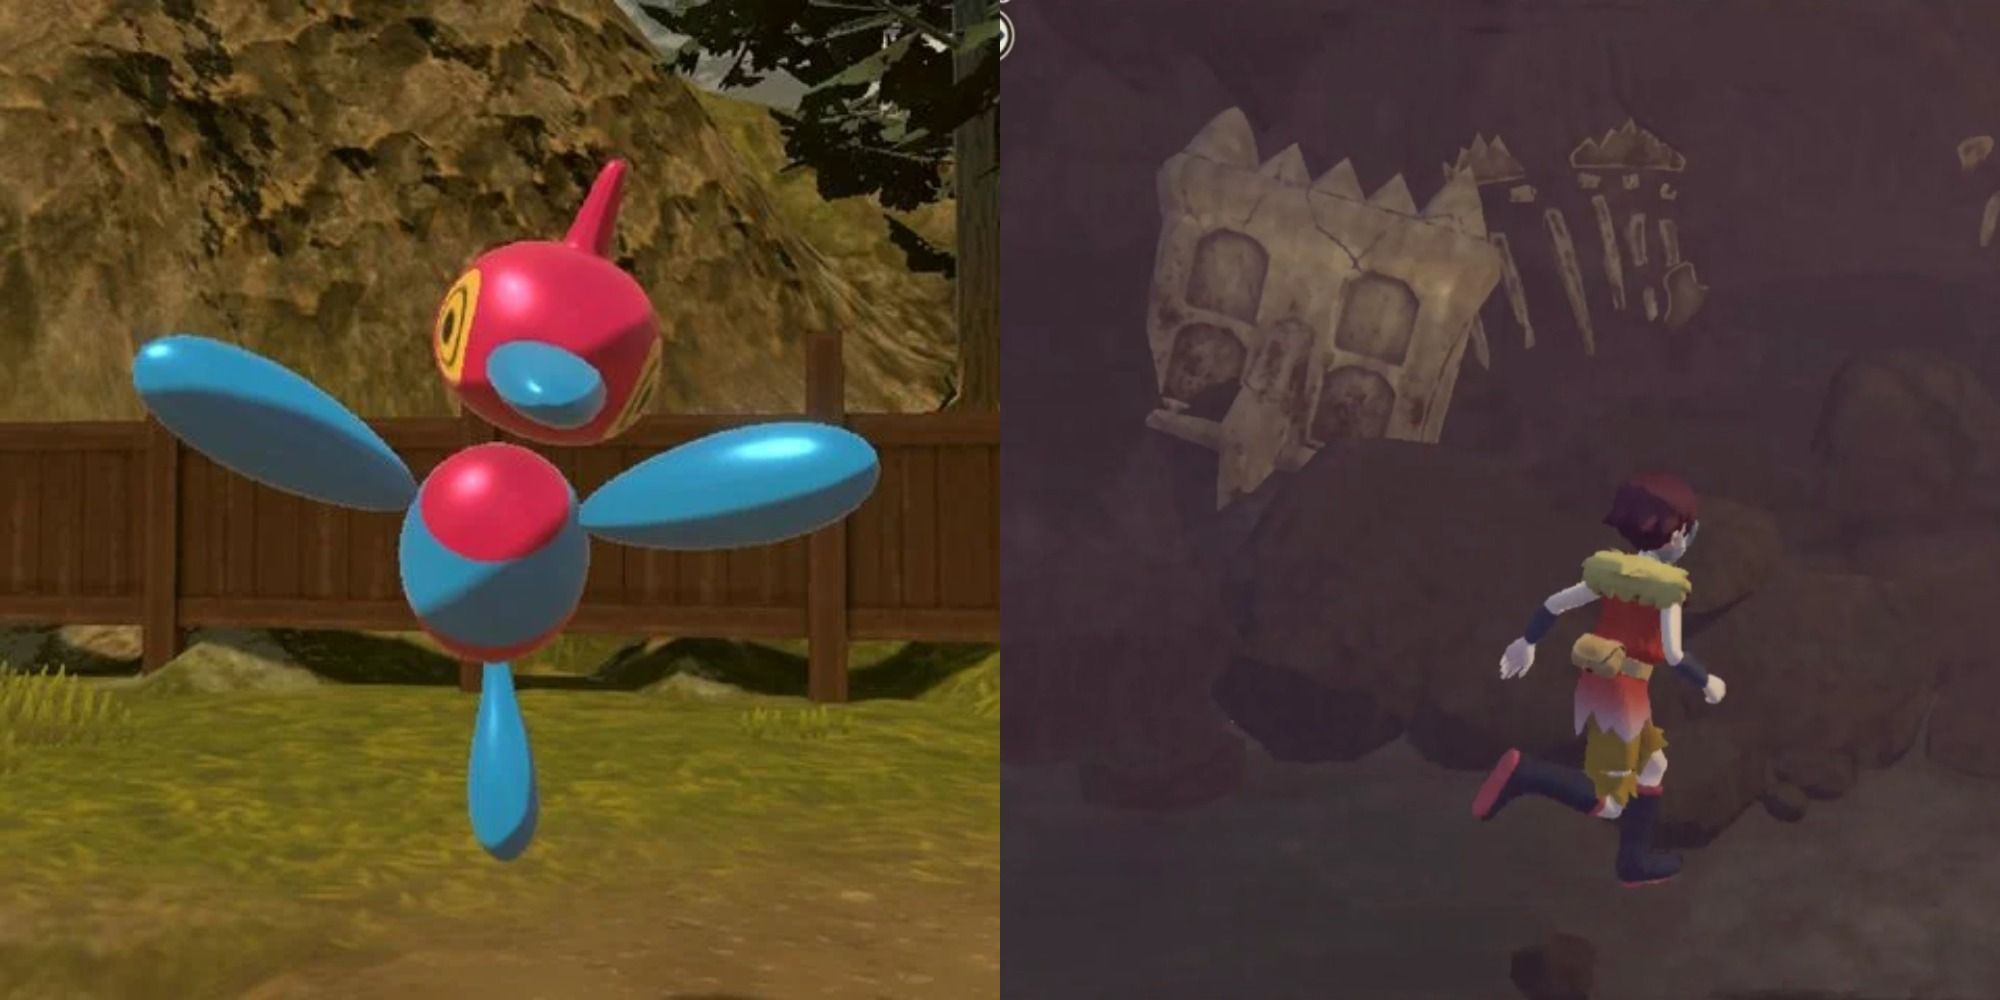 Split image showing Porygon Z and the fossil cave in Pokémon Legends: Arceus.